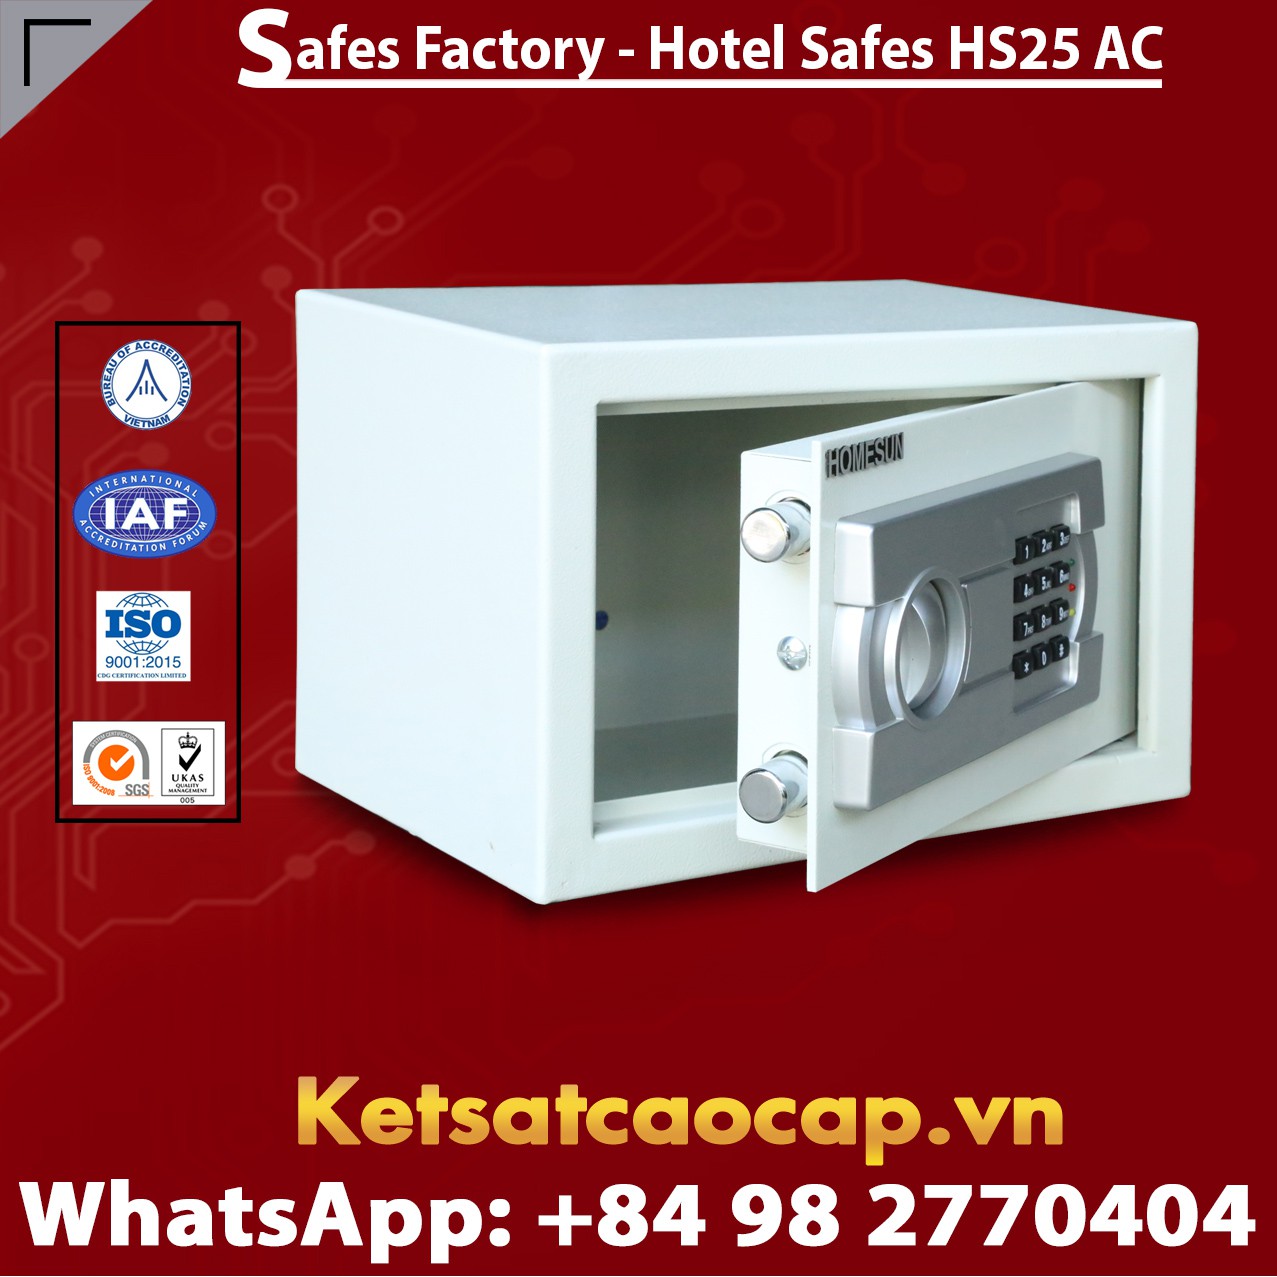 Hotel Safety Deposit Box Suppliers and Exporters‎ HOMESUN